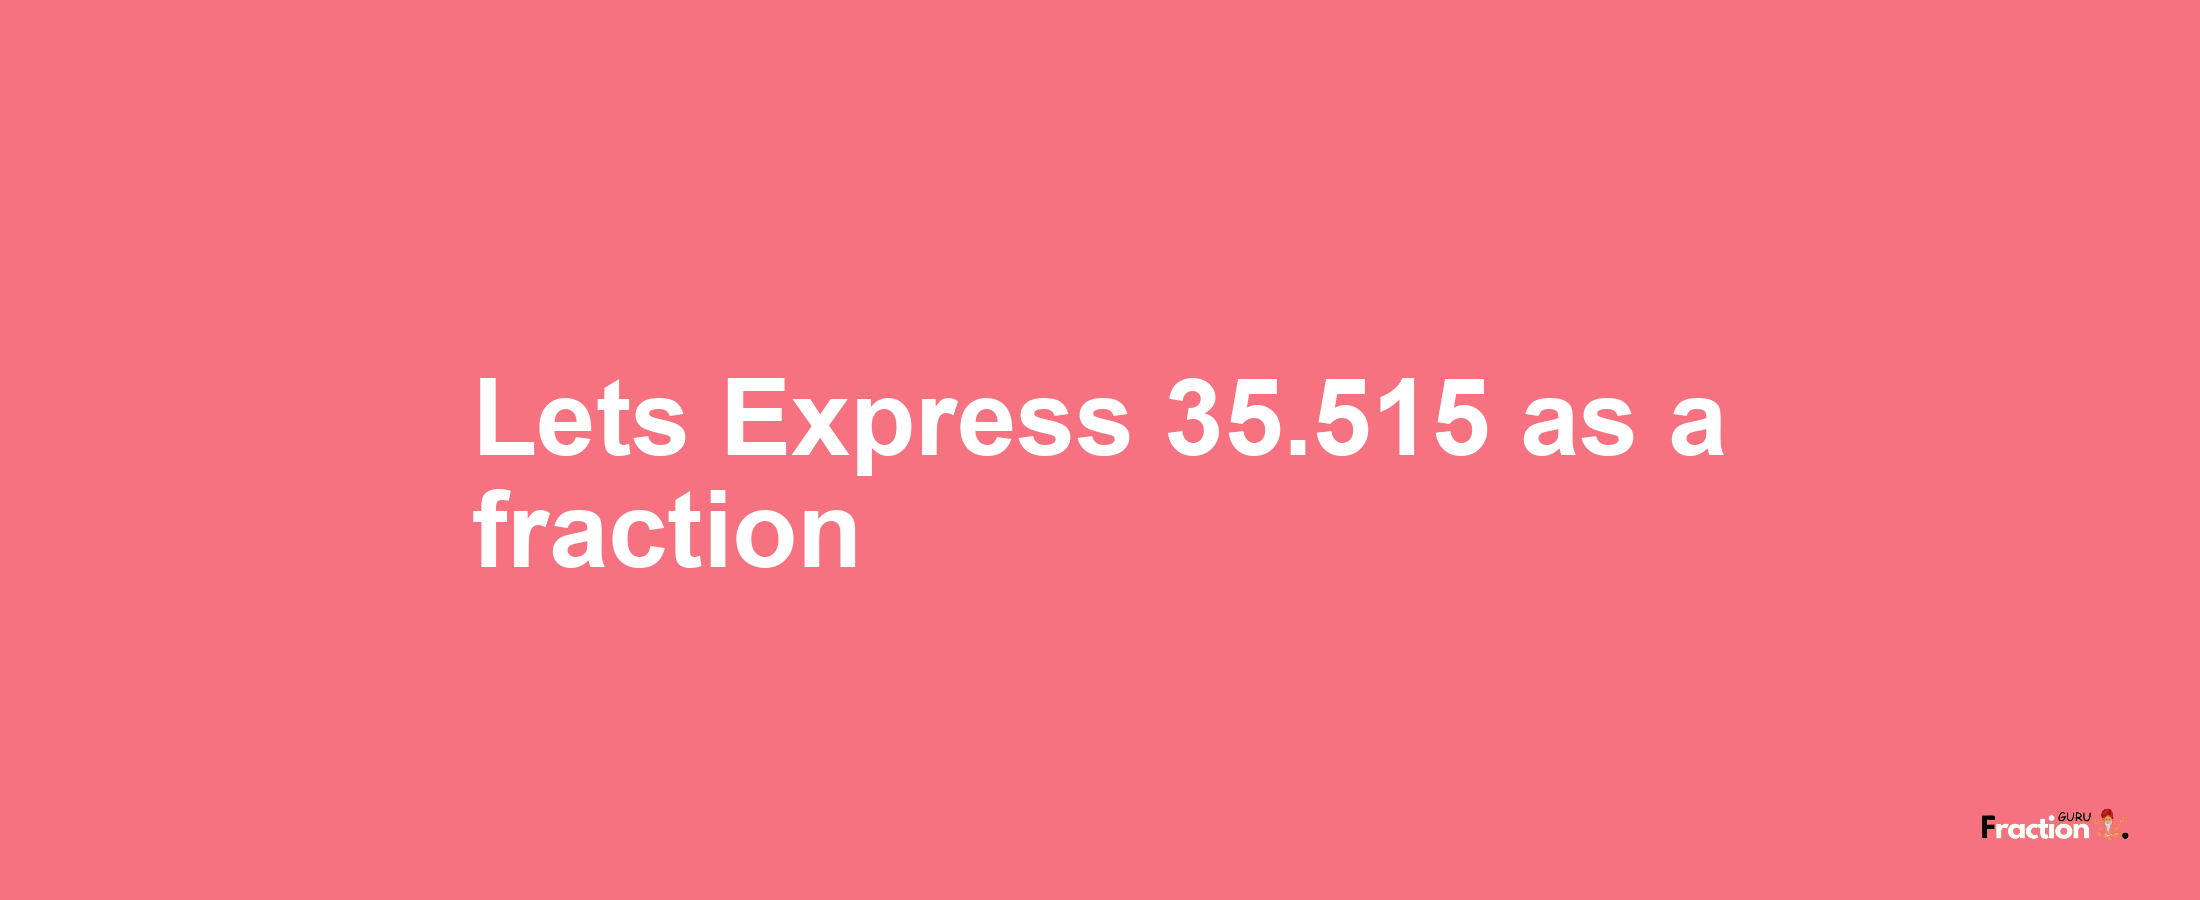 Lets Express 35.515 as afraction